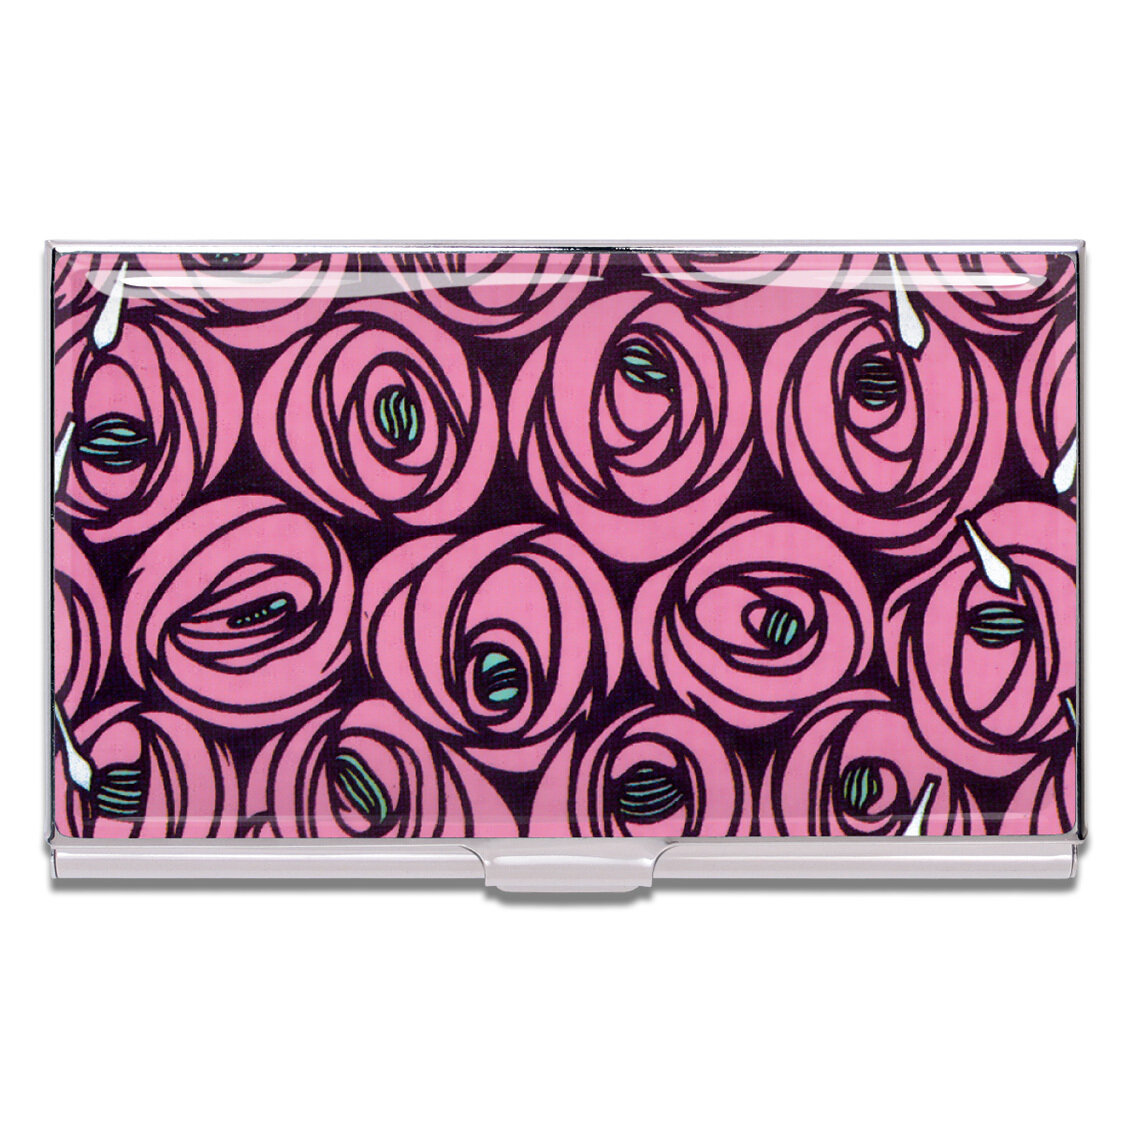 ACME Roses Business Card Case By Charles Rennie Mackintosh